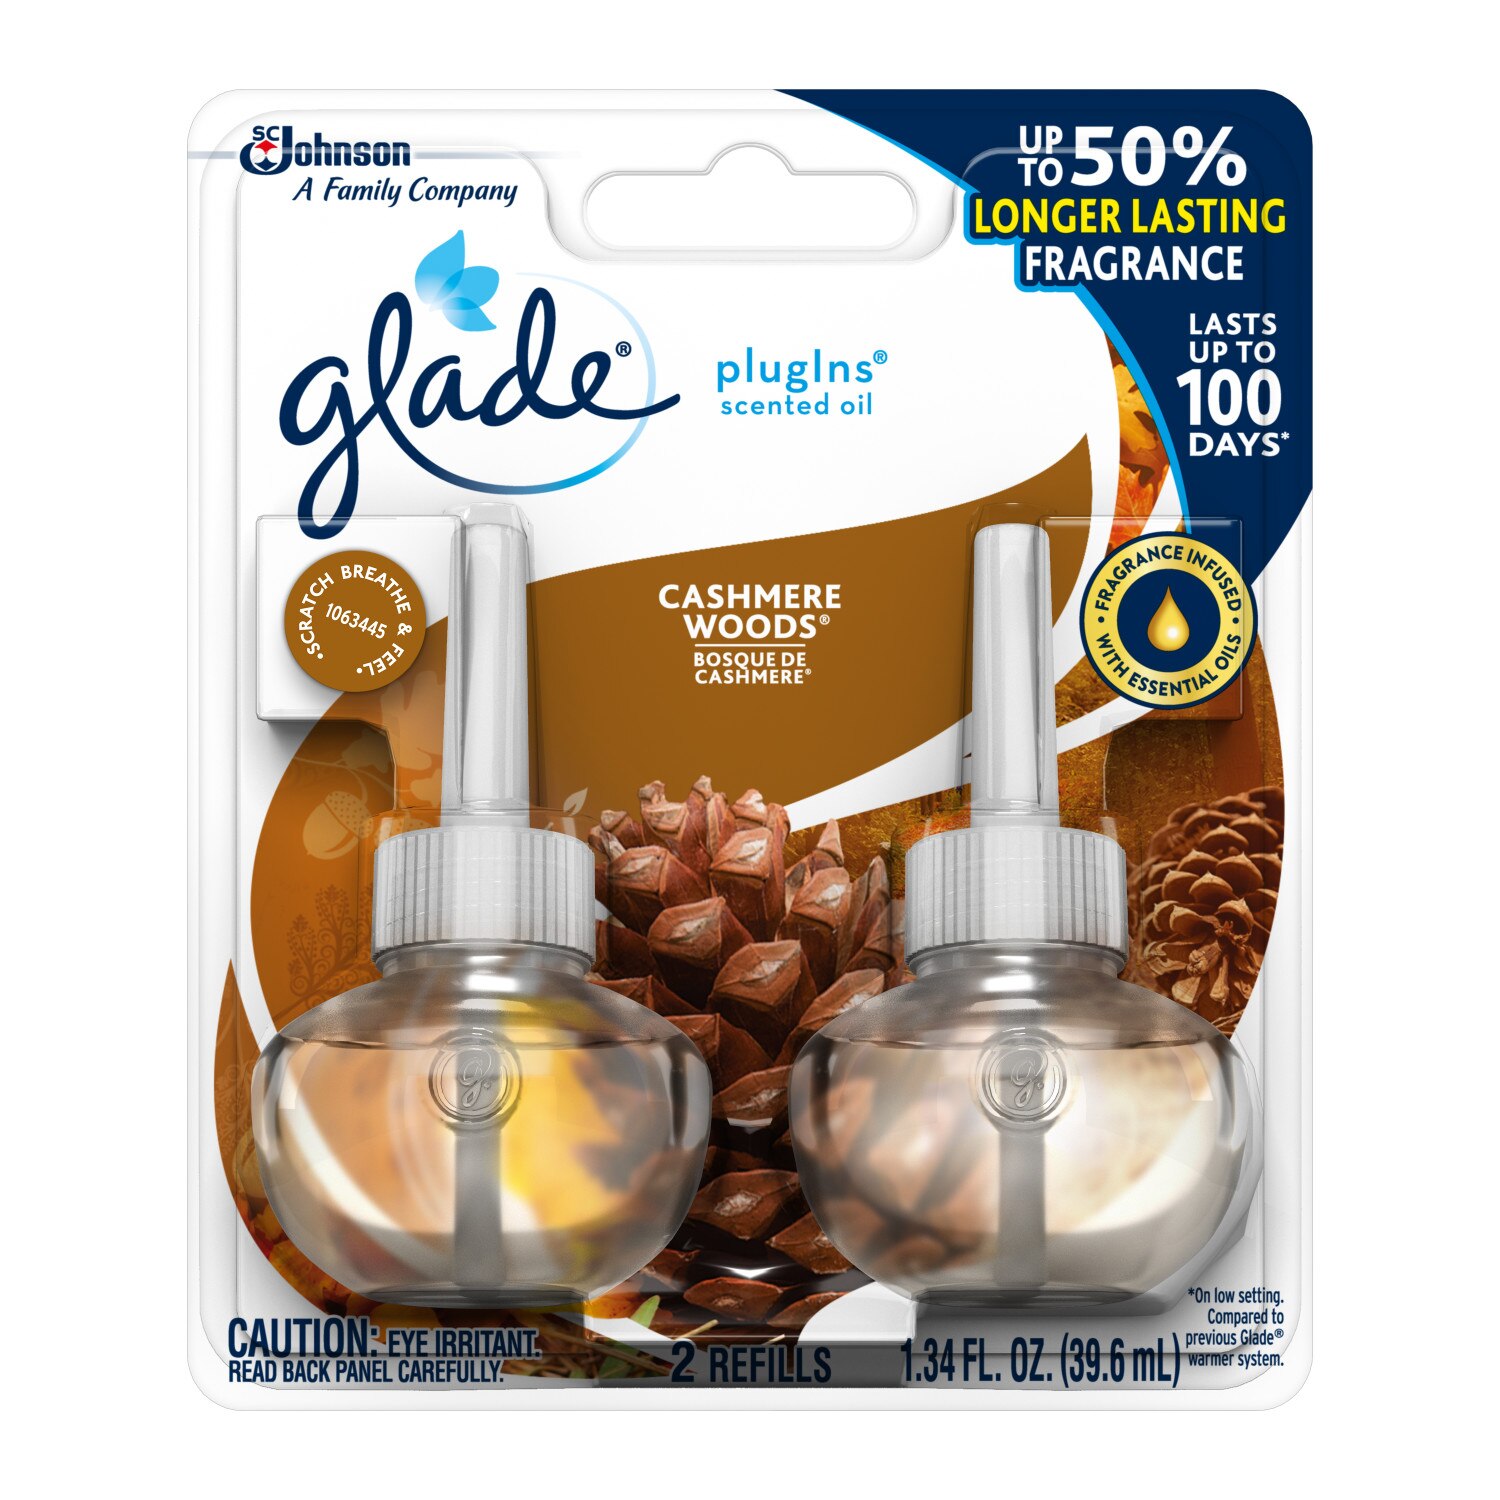 Glade PlugIns Scented Oil Refill, Cashmere Woods, 1.34 OZ, 2 CT